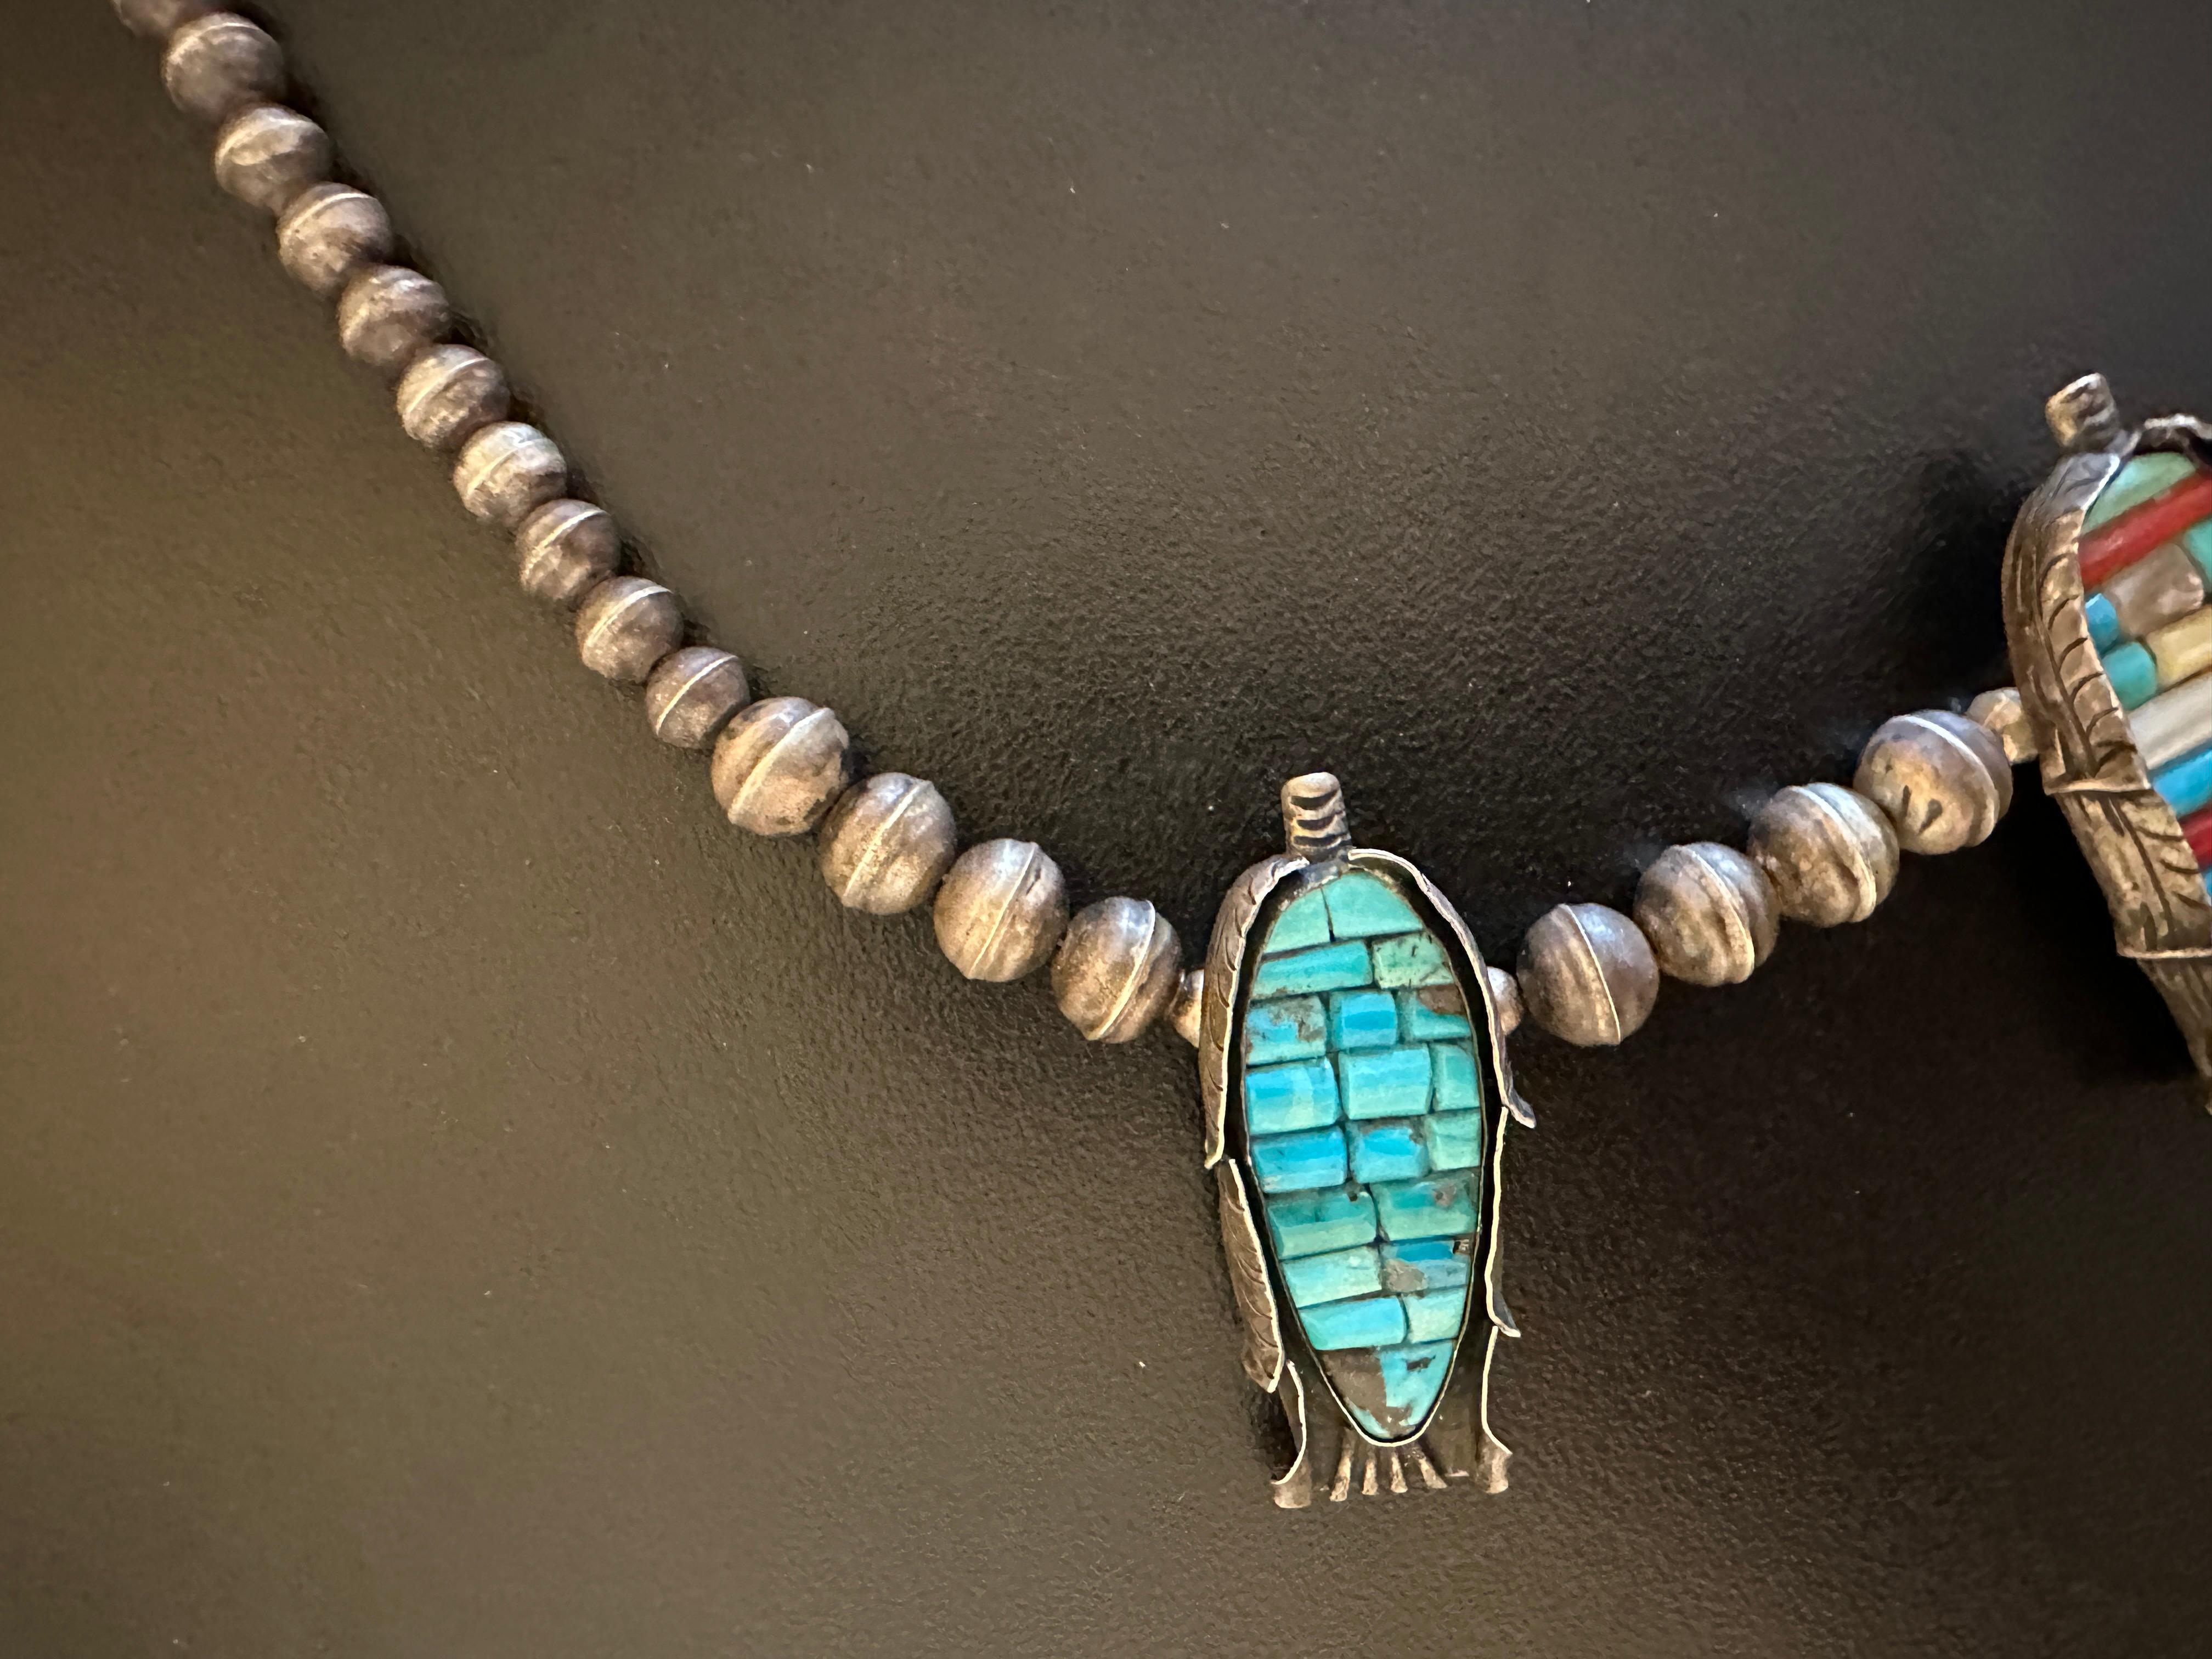  Navajo Corn Squash Blossom Necklace Museum Quality Native American Indian 1930 7